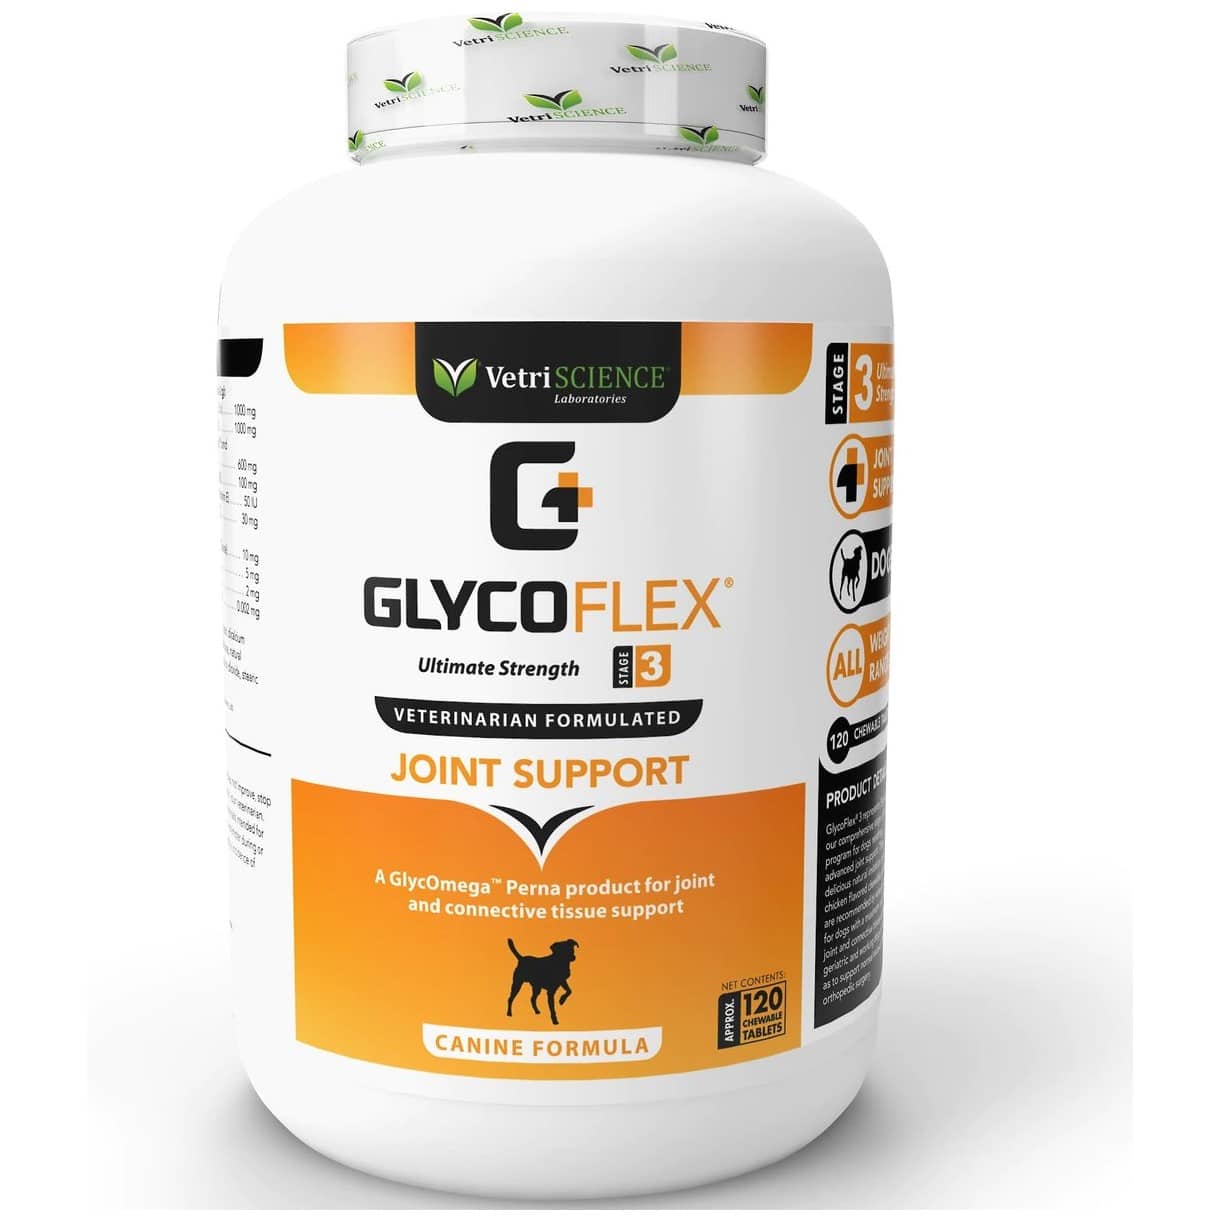 VetriScience GlycoFlex Stage III Chicken Flavored Chewable Tablets Joint Supplement for Dogs